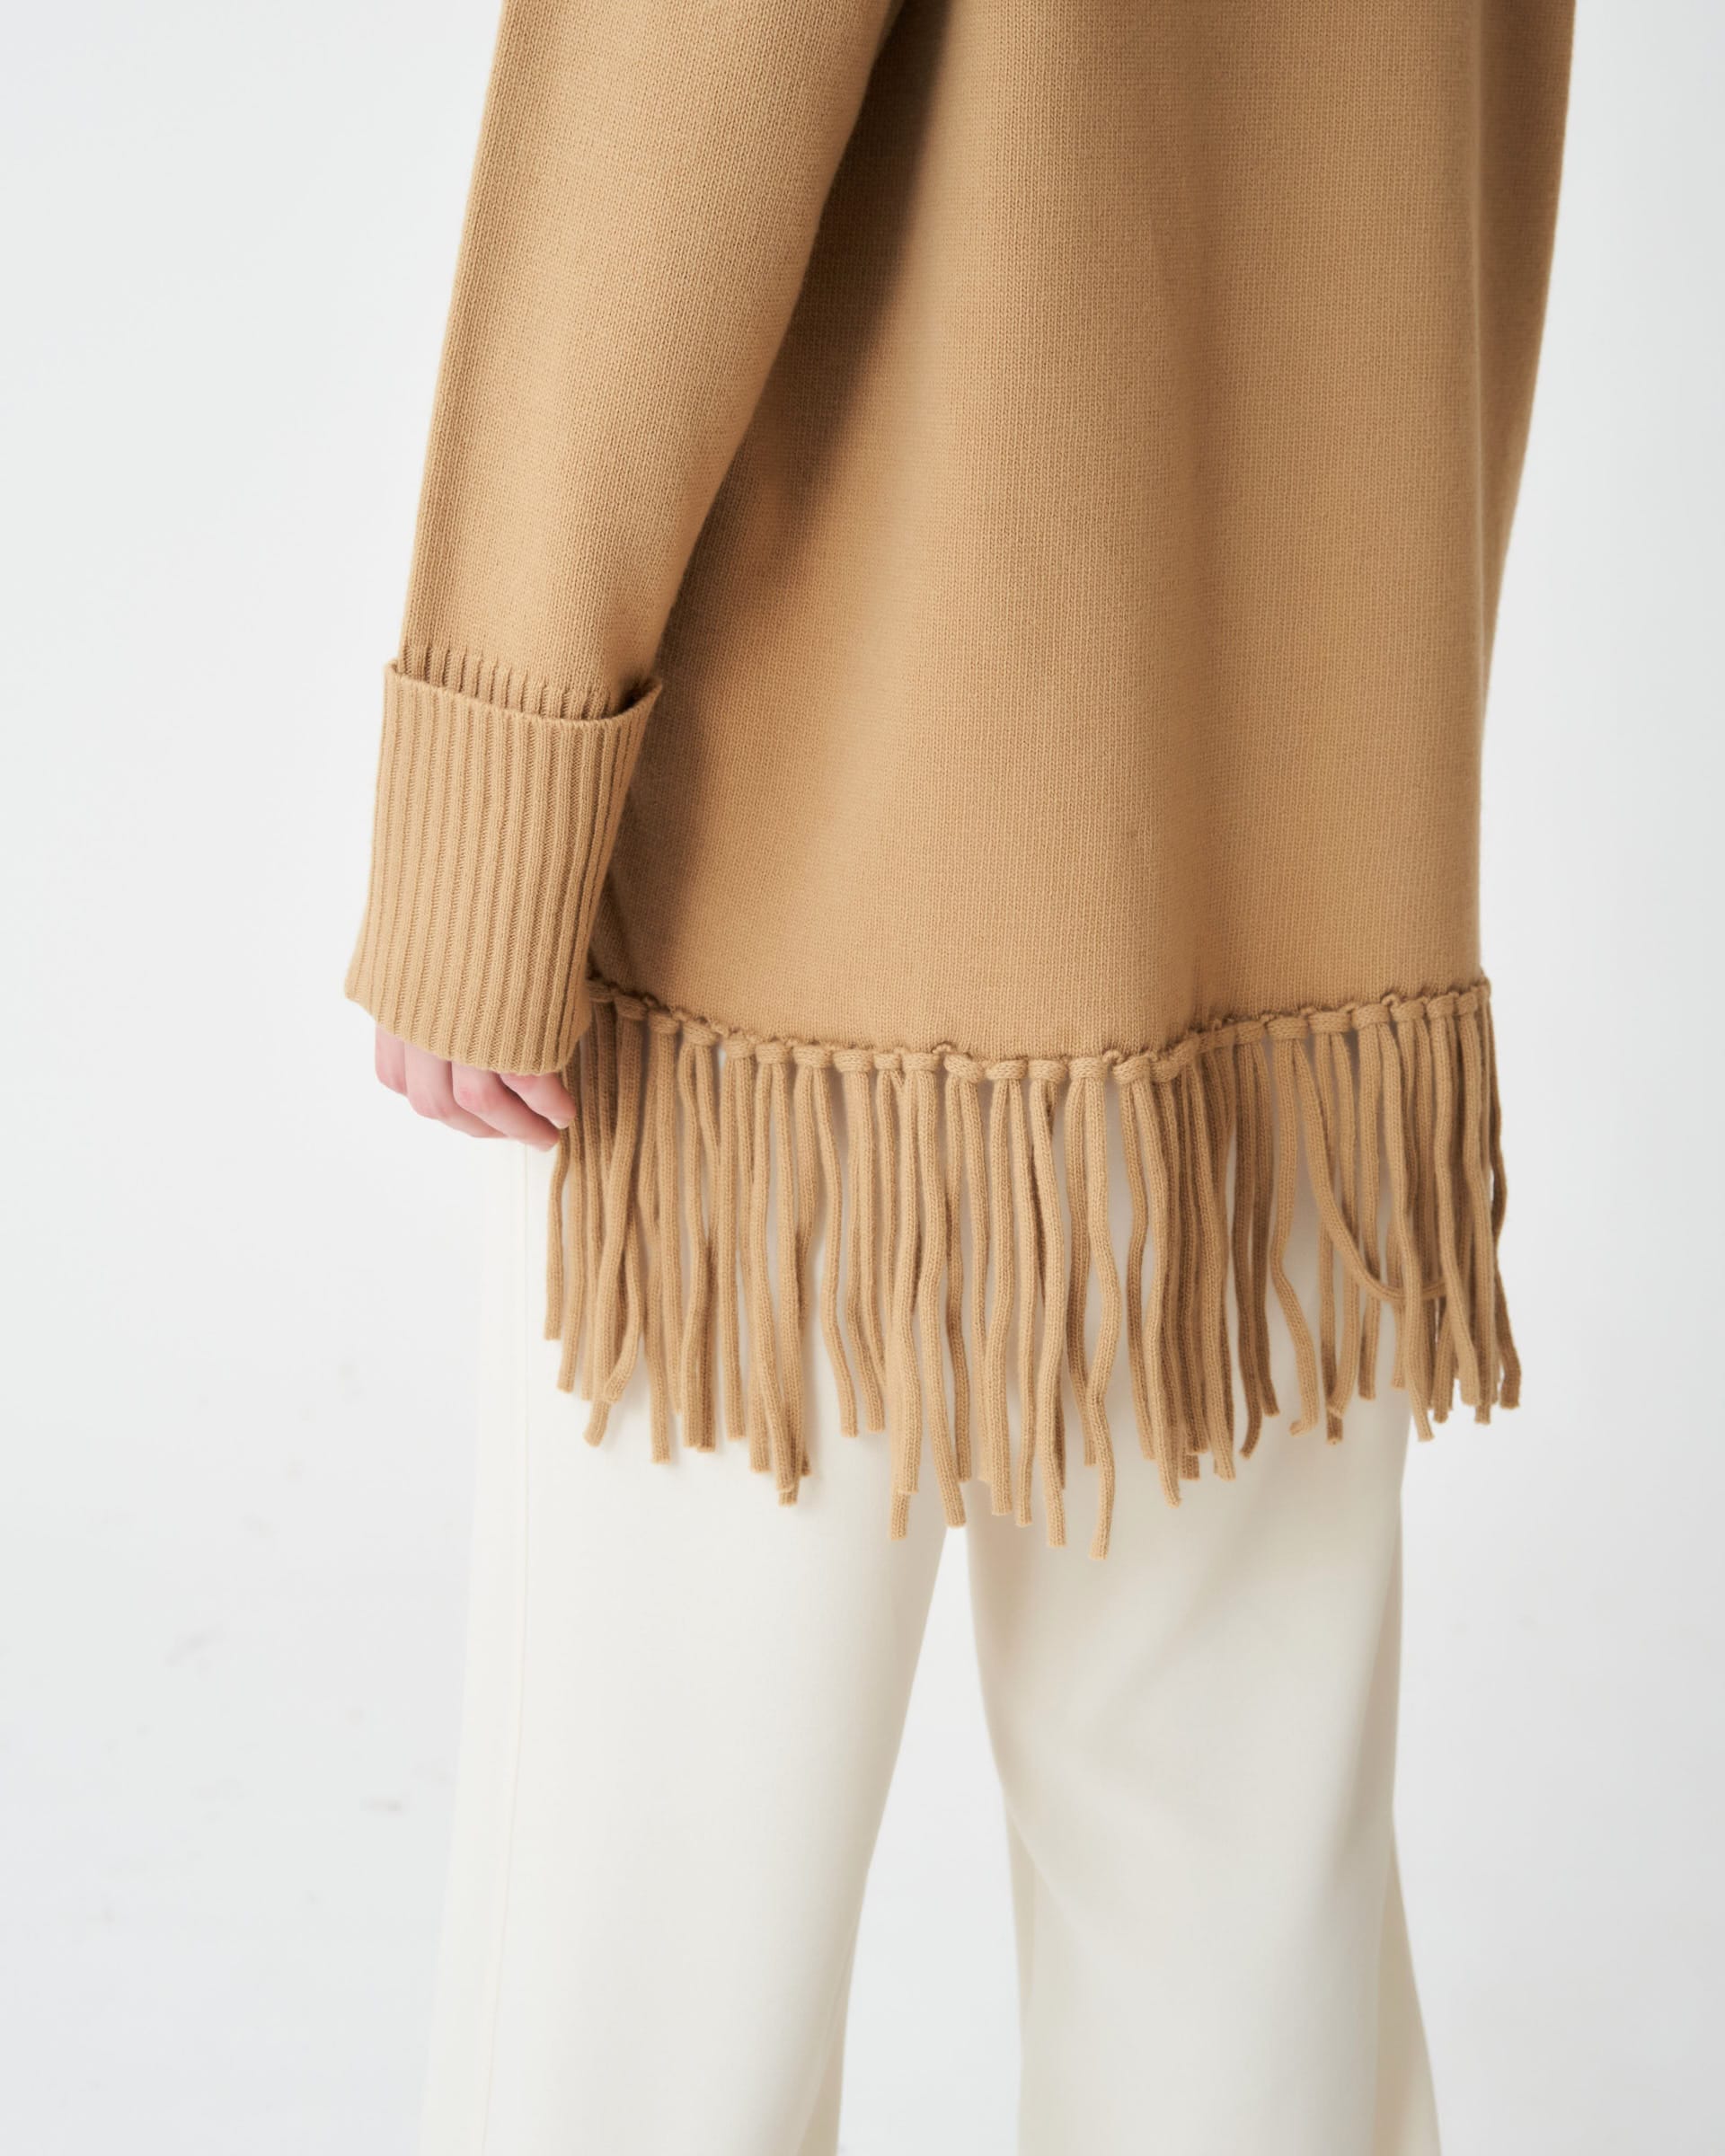 The Market Store | Sweater With Fringes